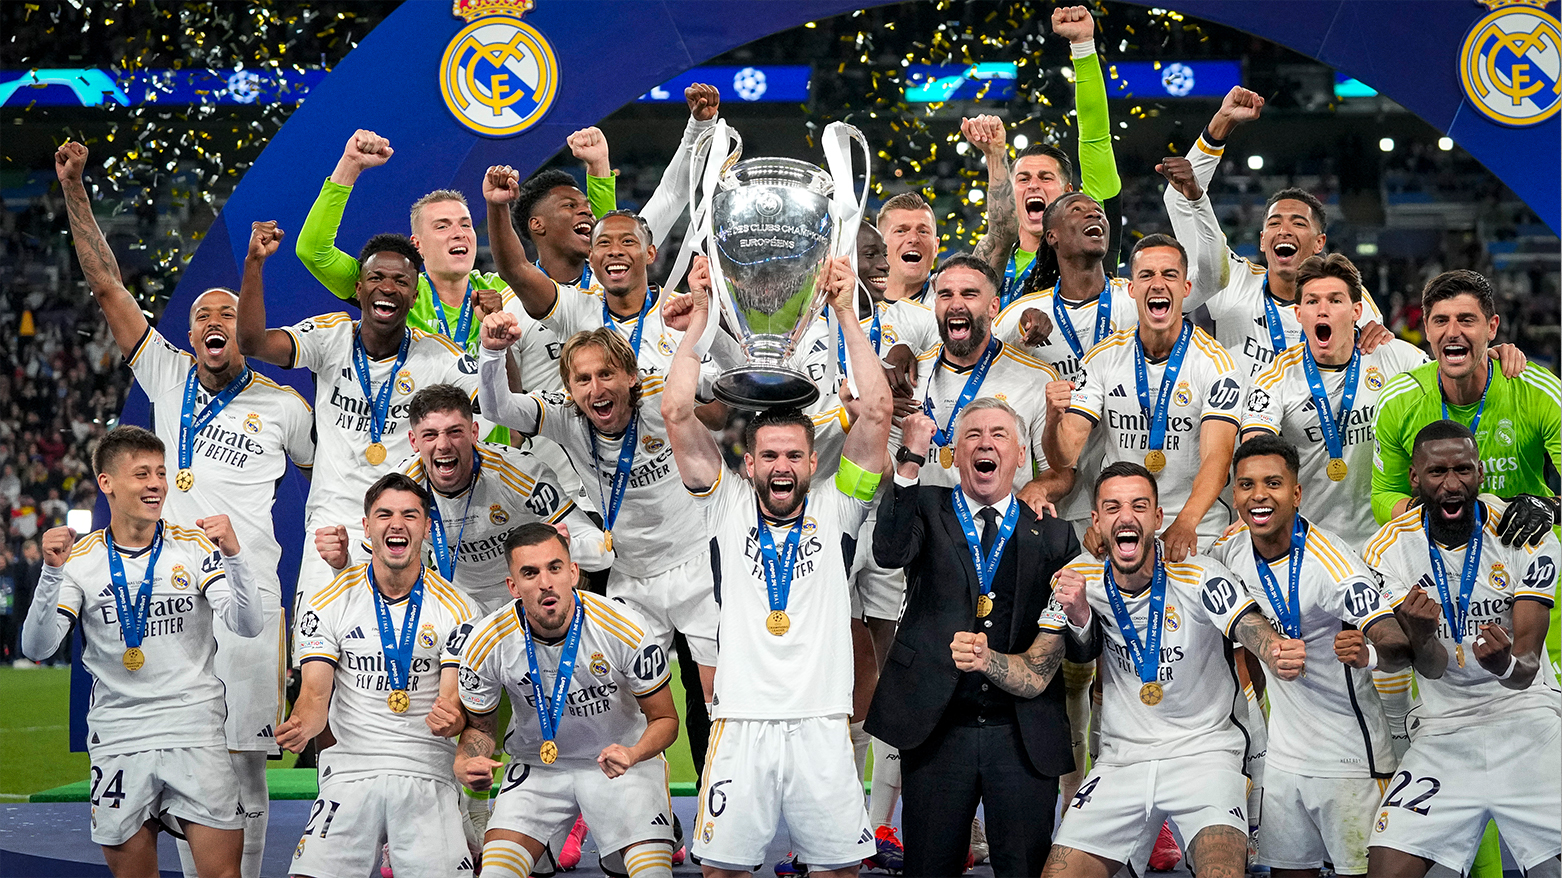 Real Madrid's players celebrate with the trophy after winning the Champions League final. (Photo: AP)